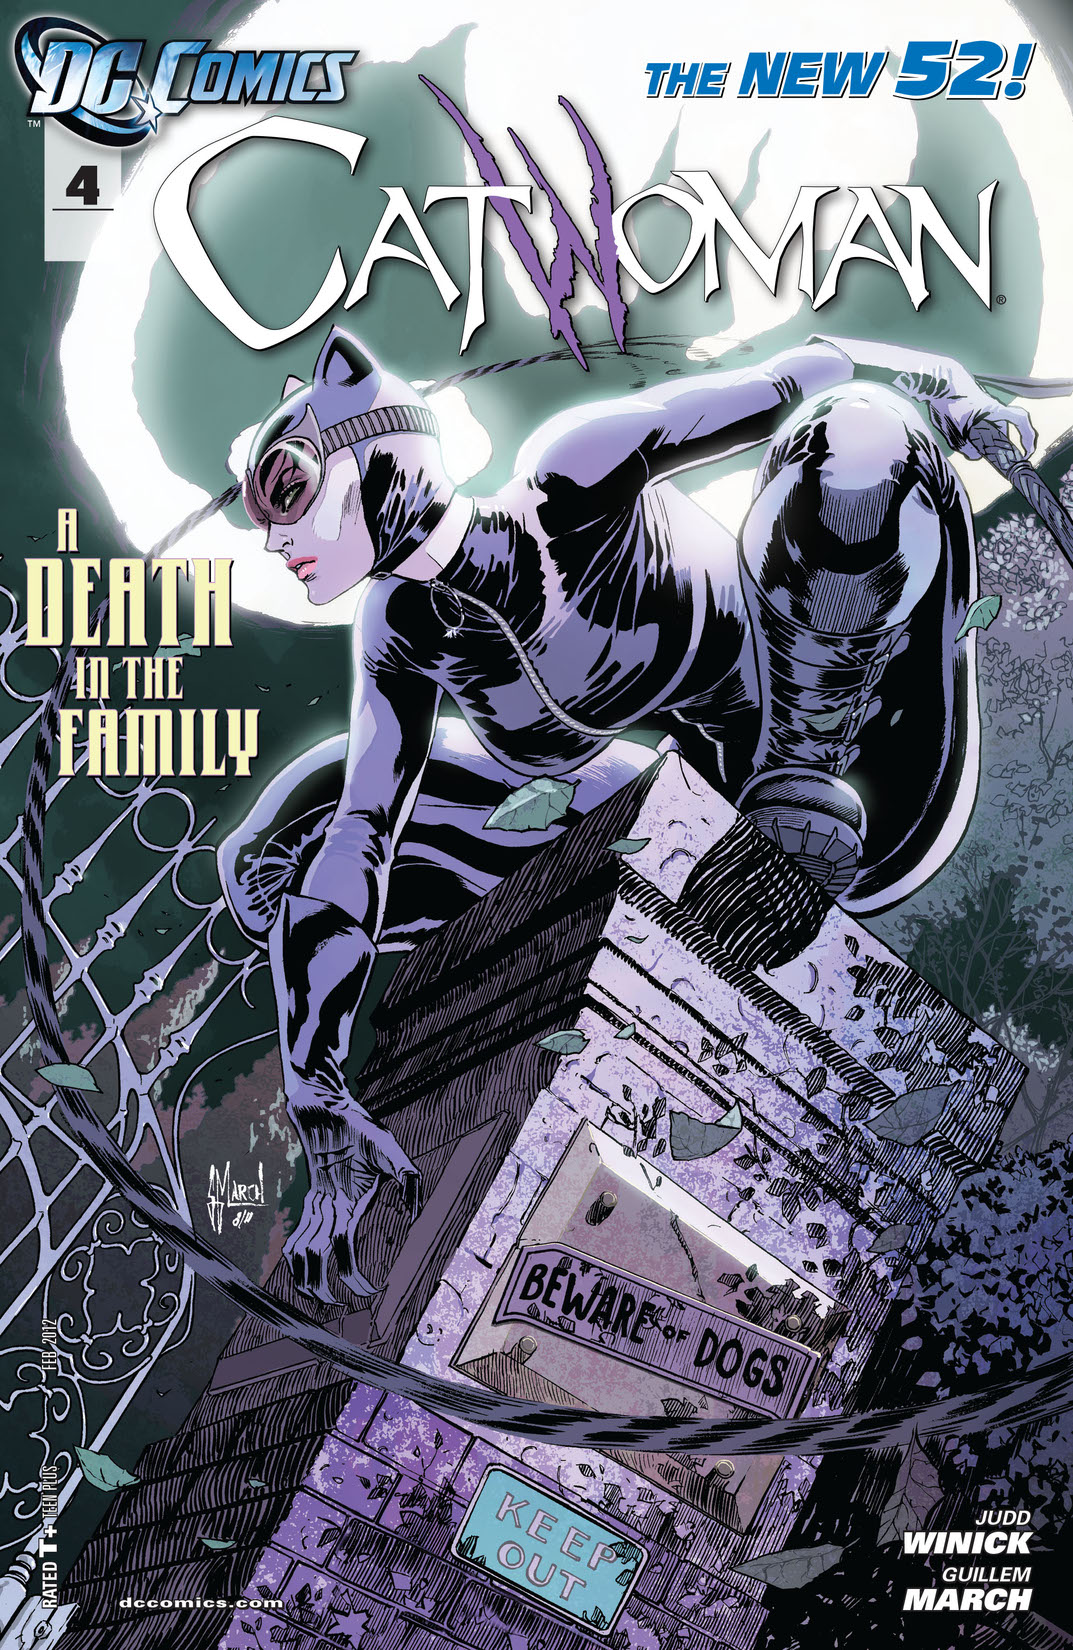 Catwoman (2011-) #4 preview images